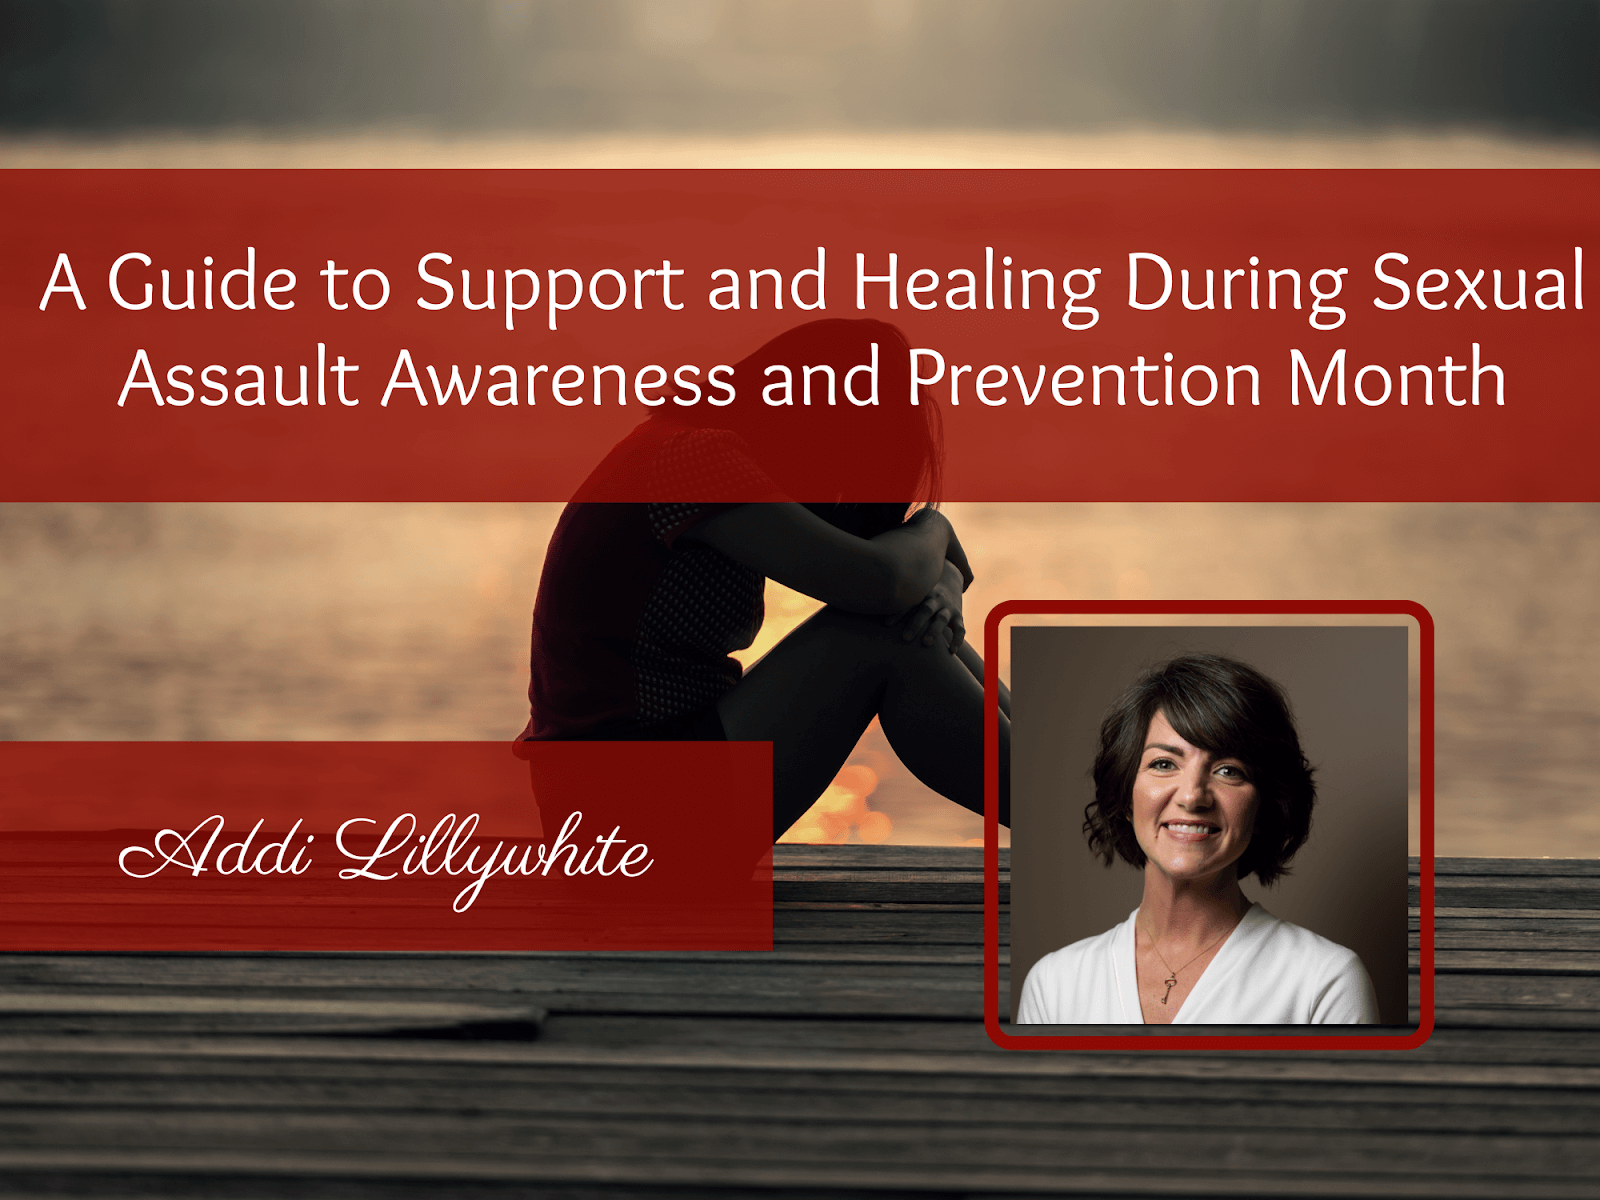 A Guide to Support and Healing During Sexual Assault Awareness and Prevention Month